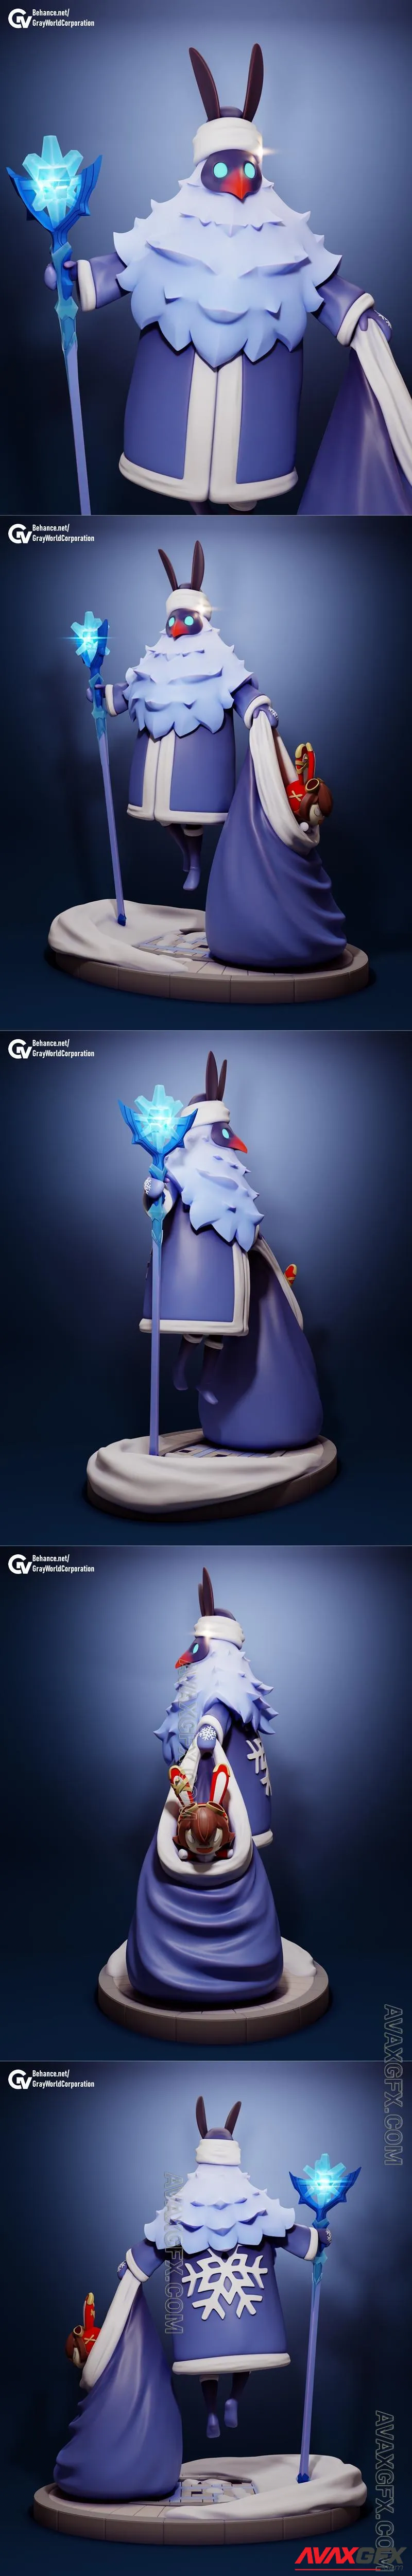 Ded Moroz From Abyss Genshin Impact - STL 3D Model